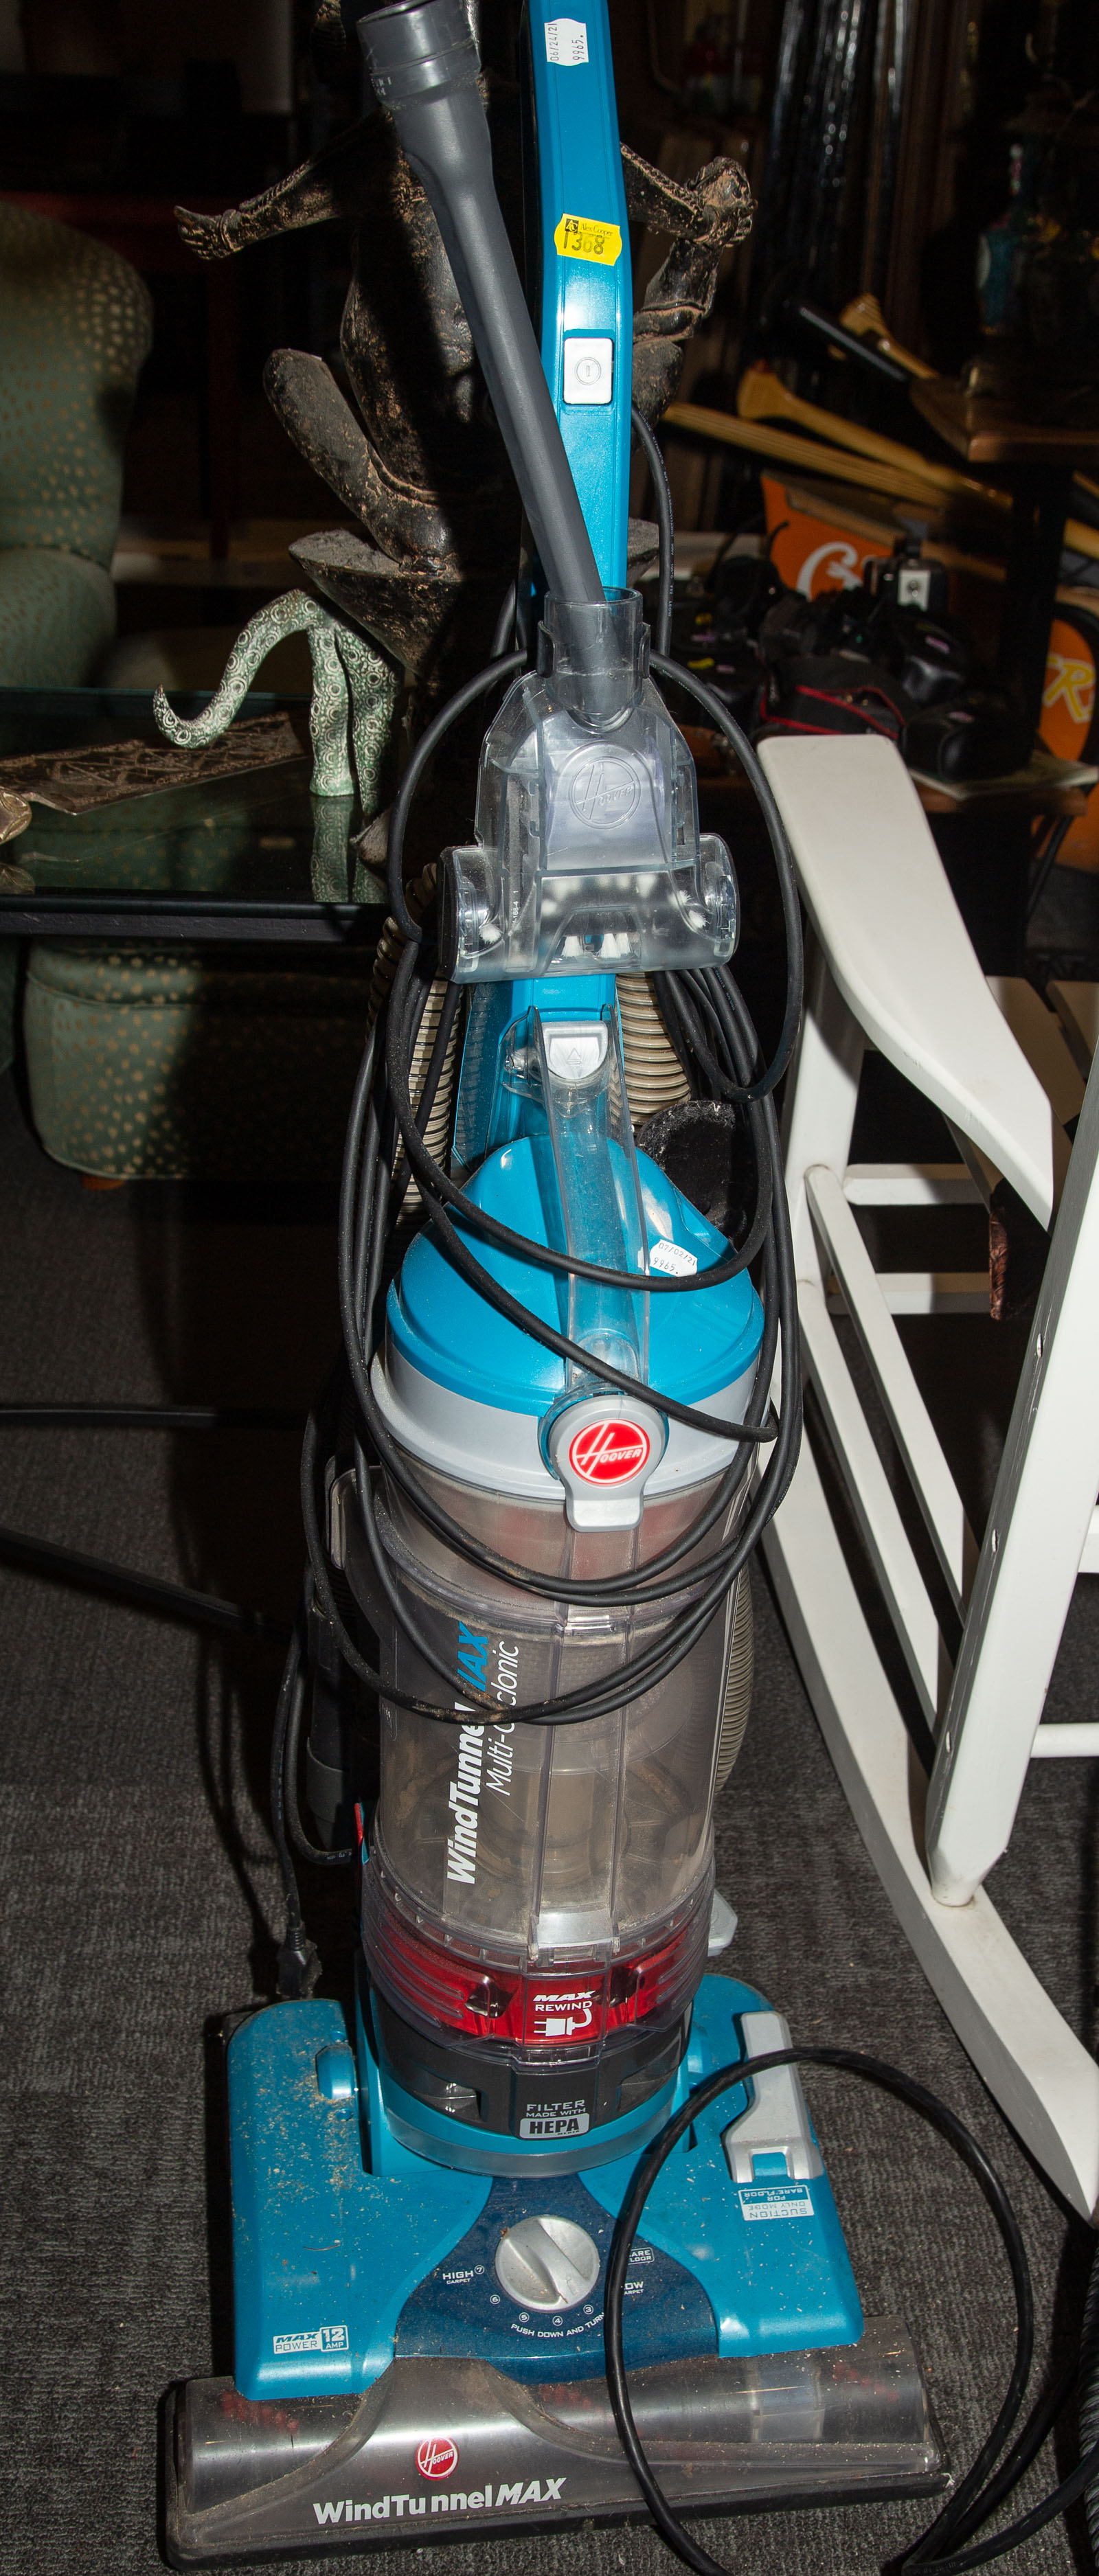 HOOVER WIND TUNNEL MAX VACUUM CLEANER